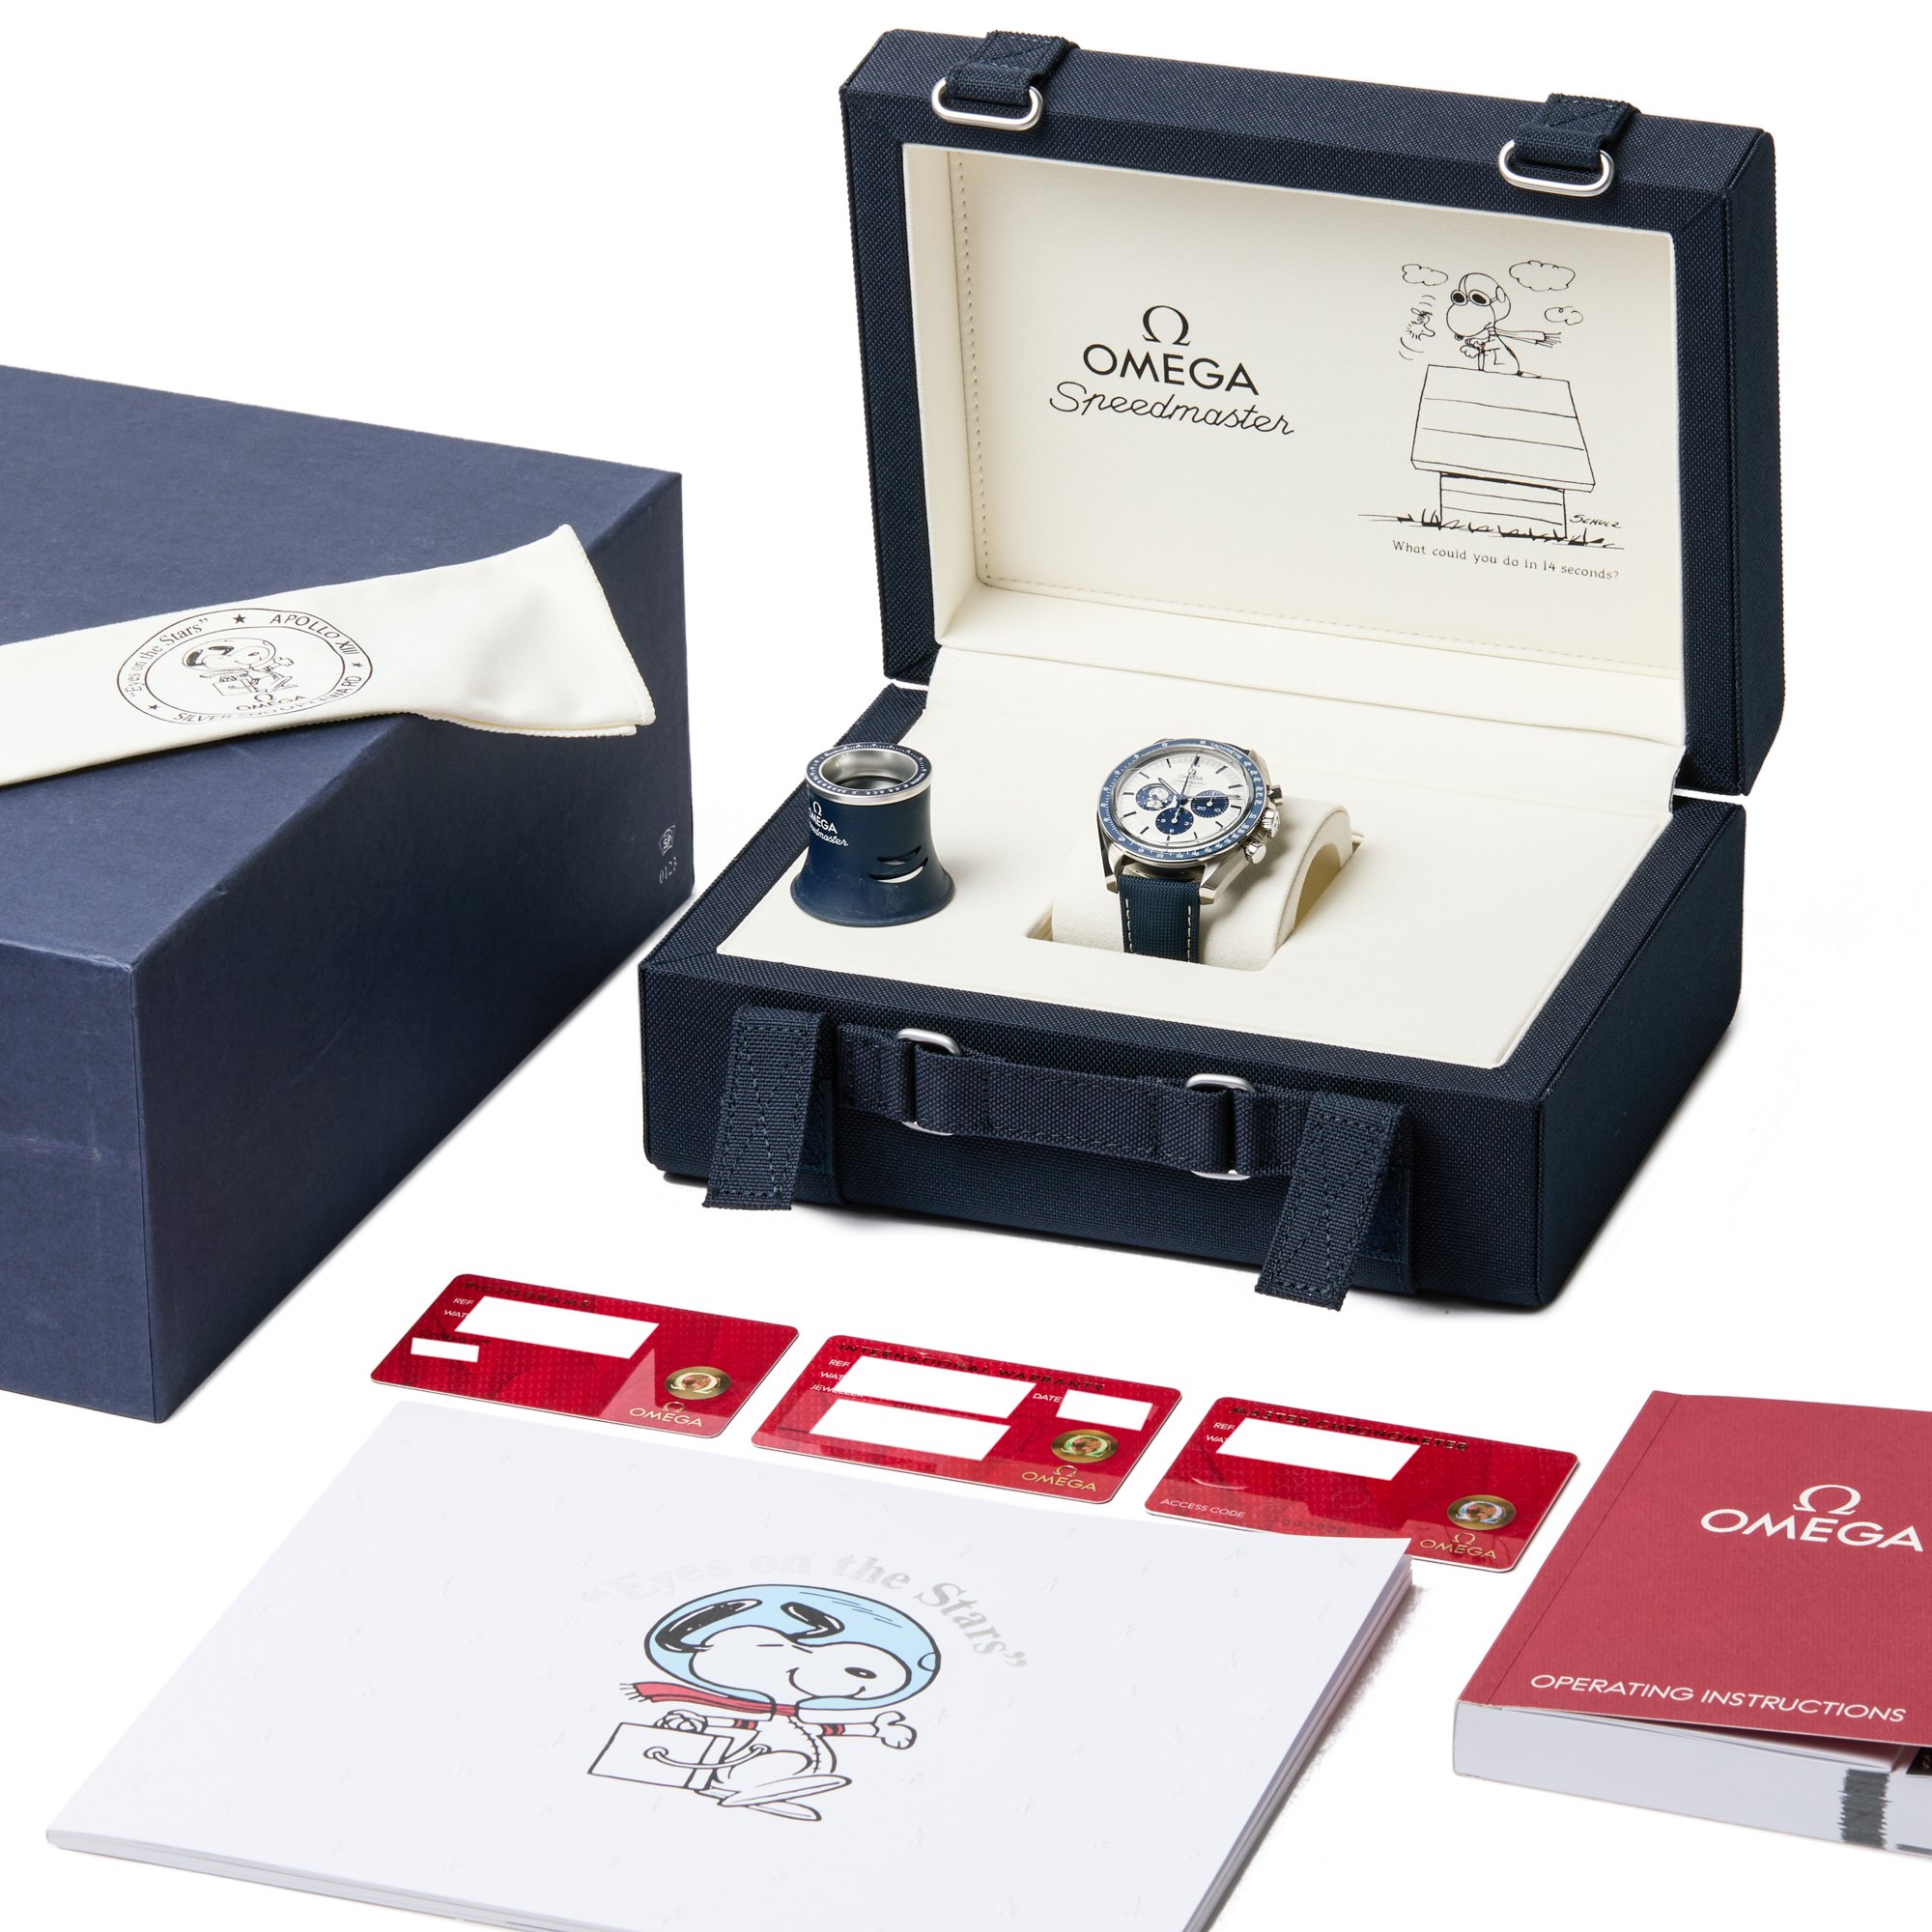 Omega Speedmaster Silver Snoopy Award Anniversary Series Roestvrij Staal 310.32.42.50.02.001